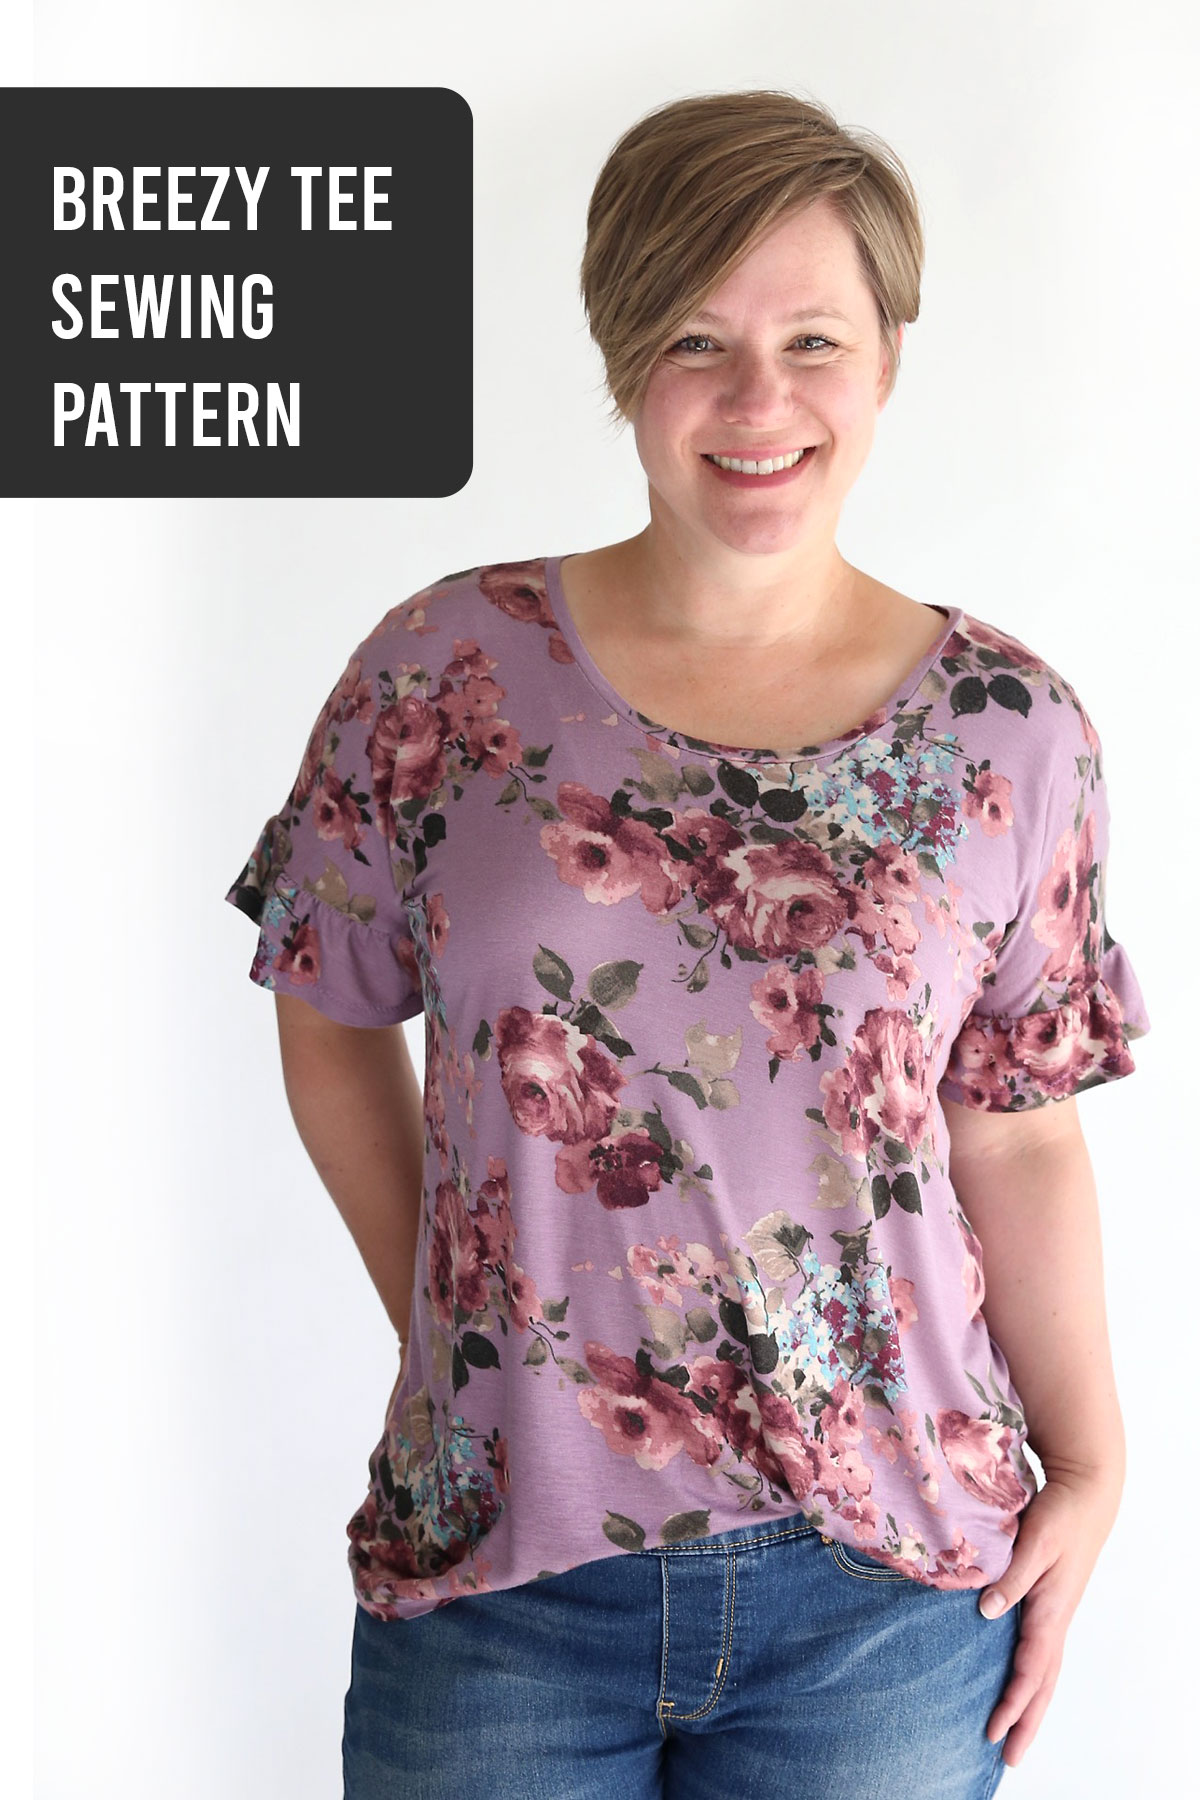 The breezy tee sewing pattern + flutter sleeves